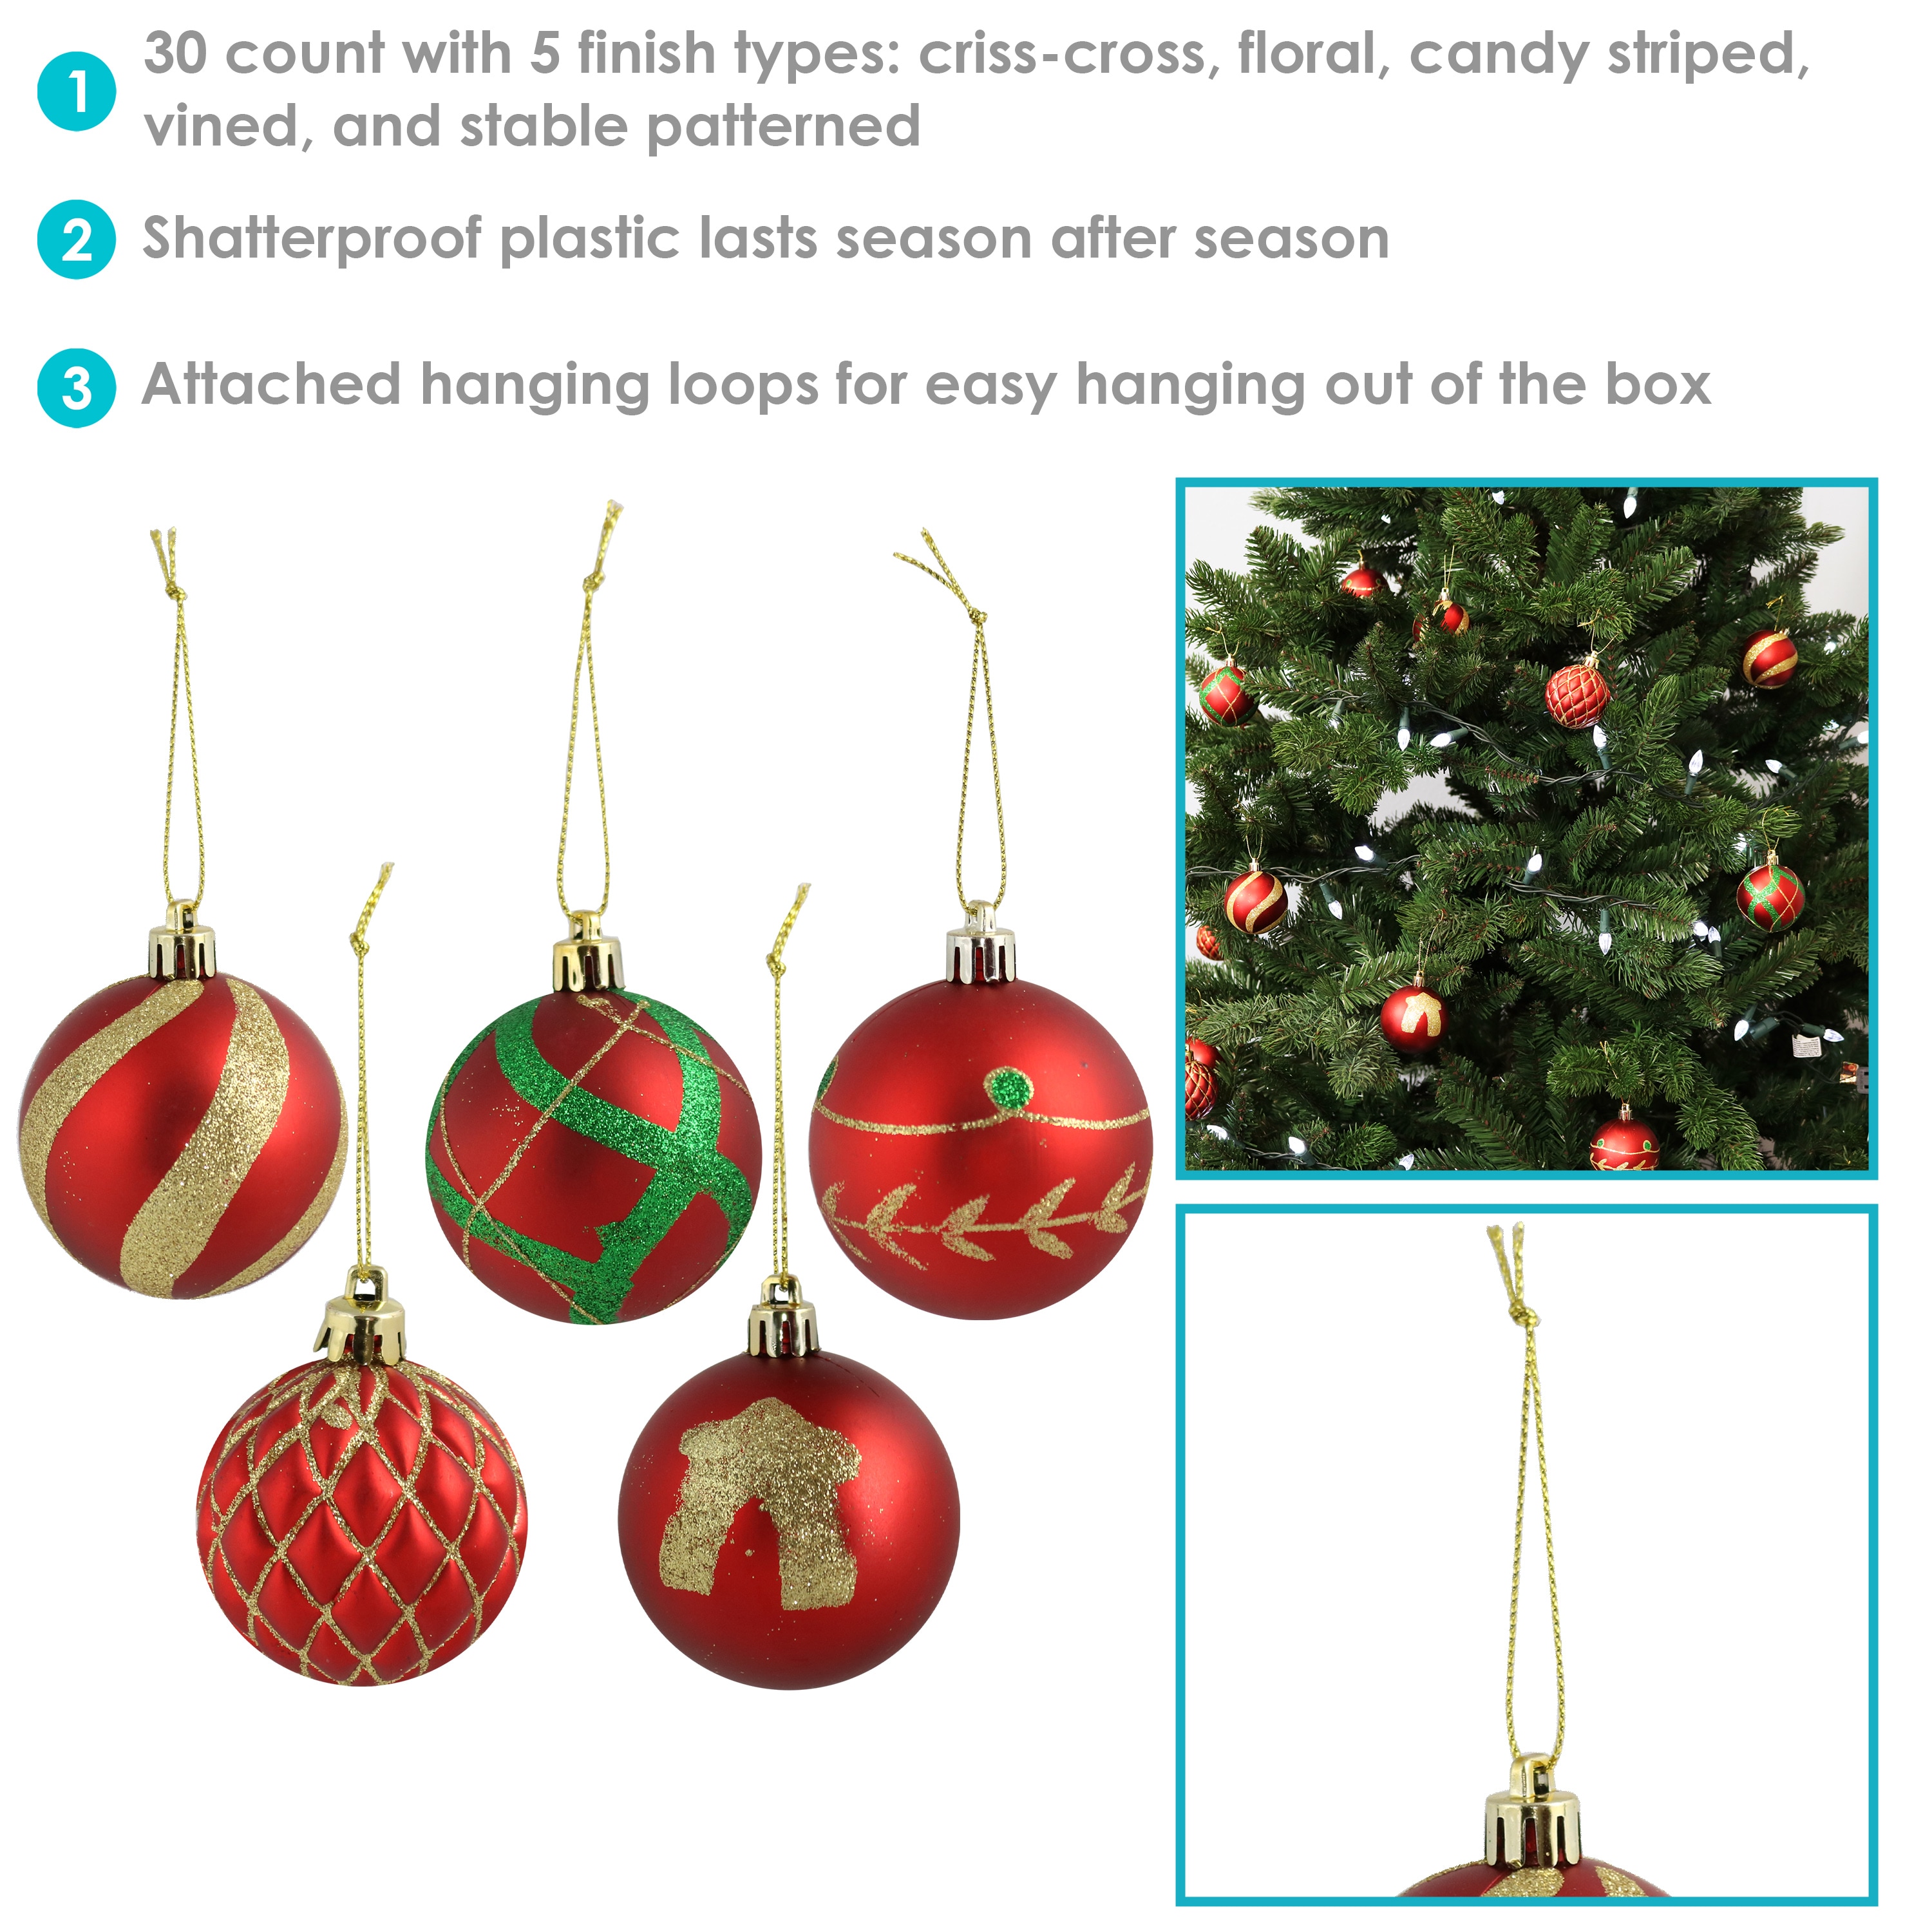 30mm Shatterproof Christmas Ball Ornaments 36ct by Place & Time